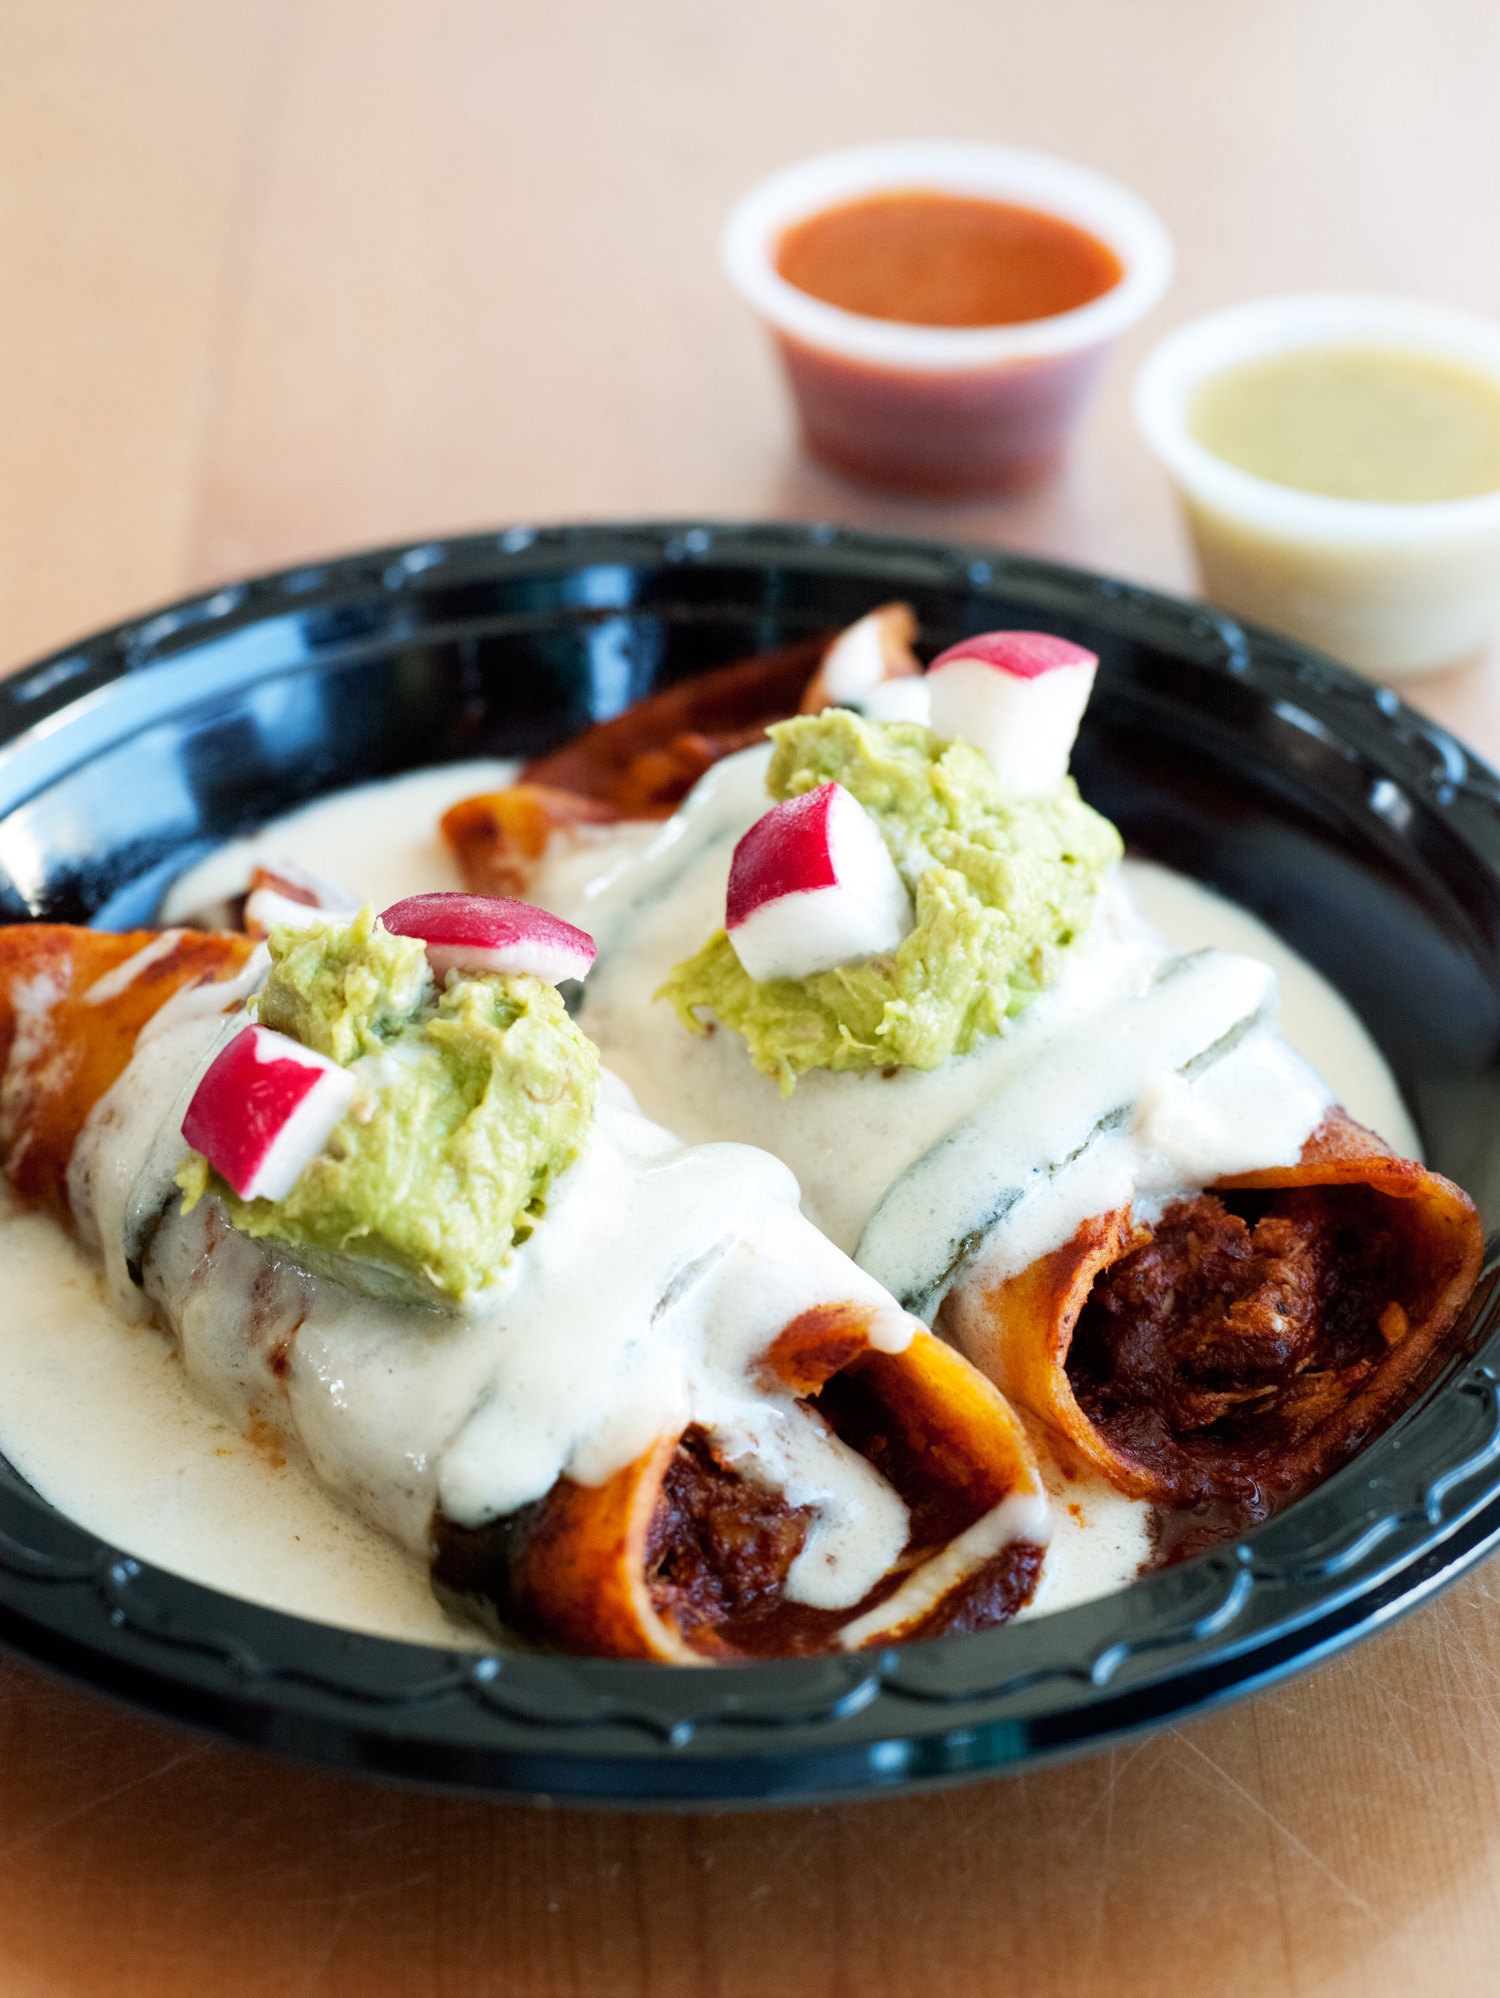 More great spots for South-of-the-Border eats